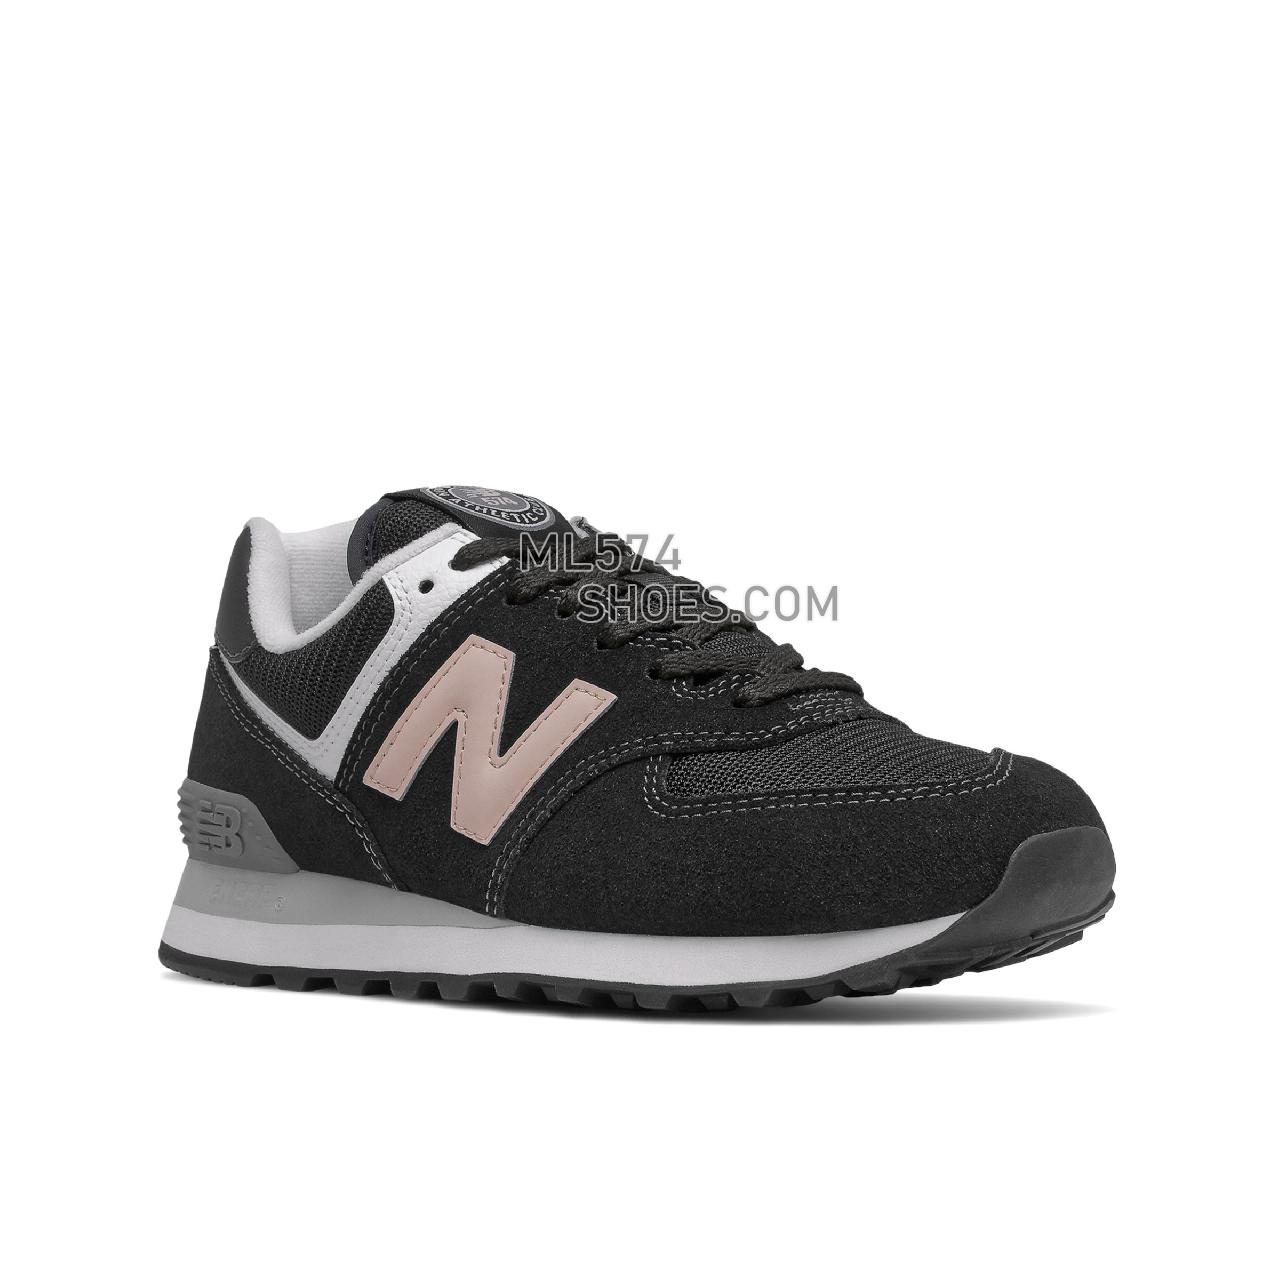 New Balance 574 - Women's Classic Sneakers - Black with Oyster Pink - WL574HB2